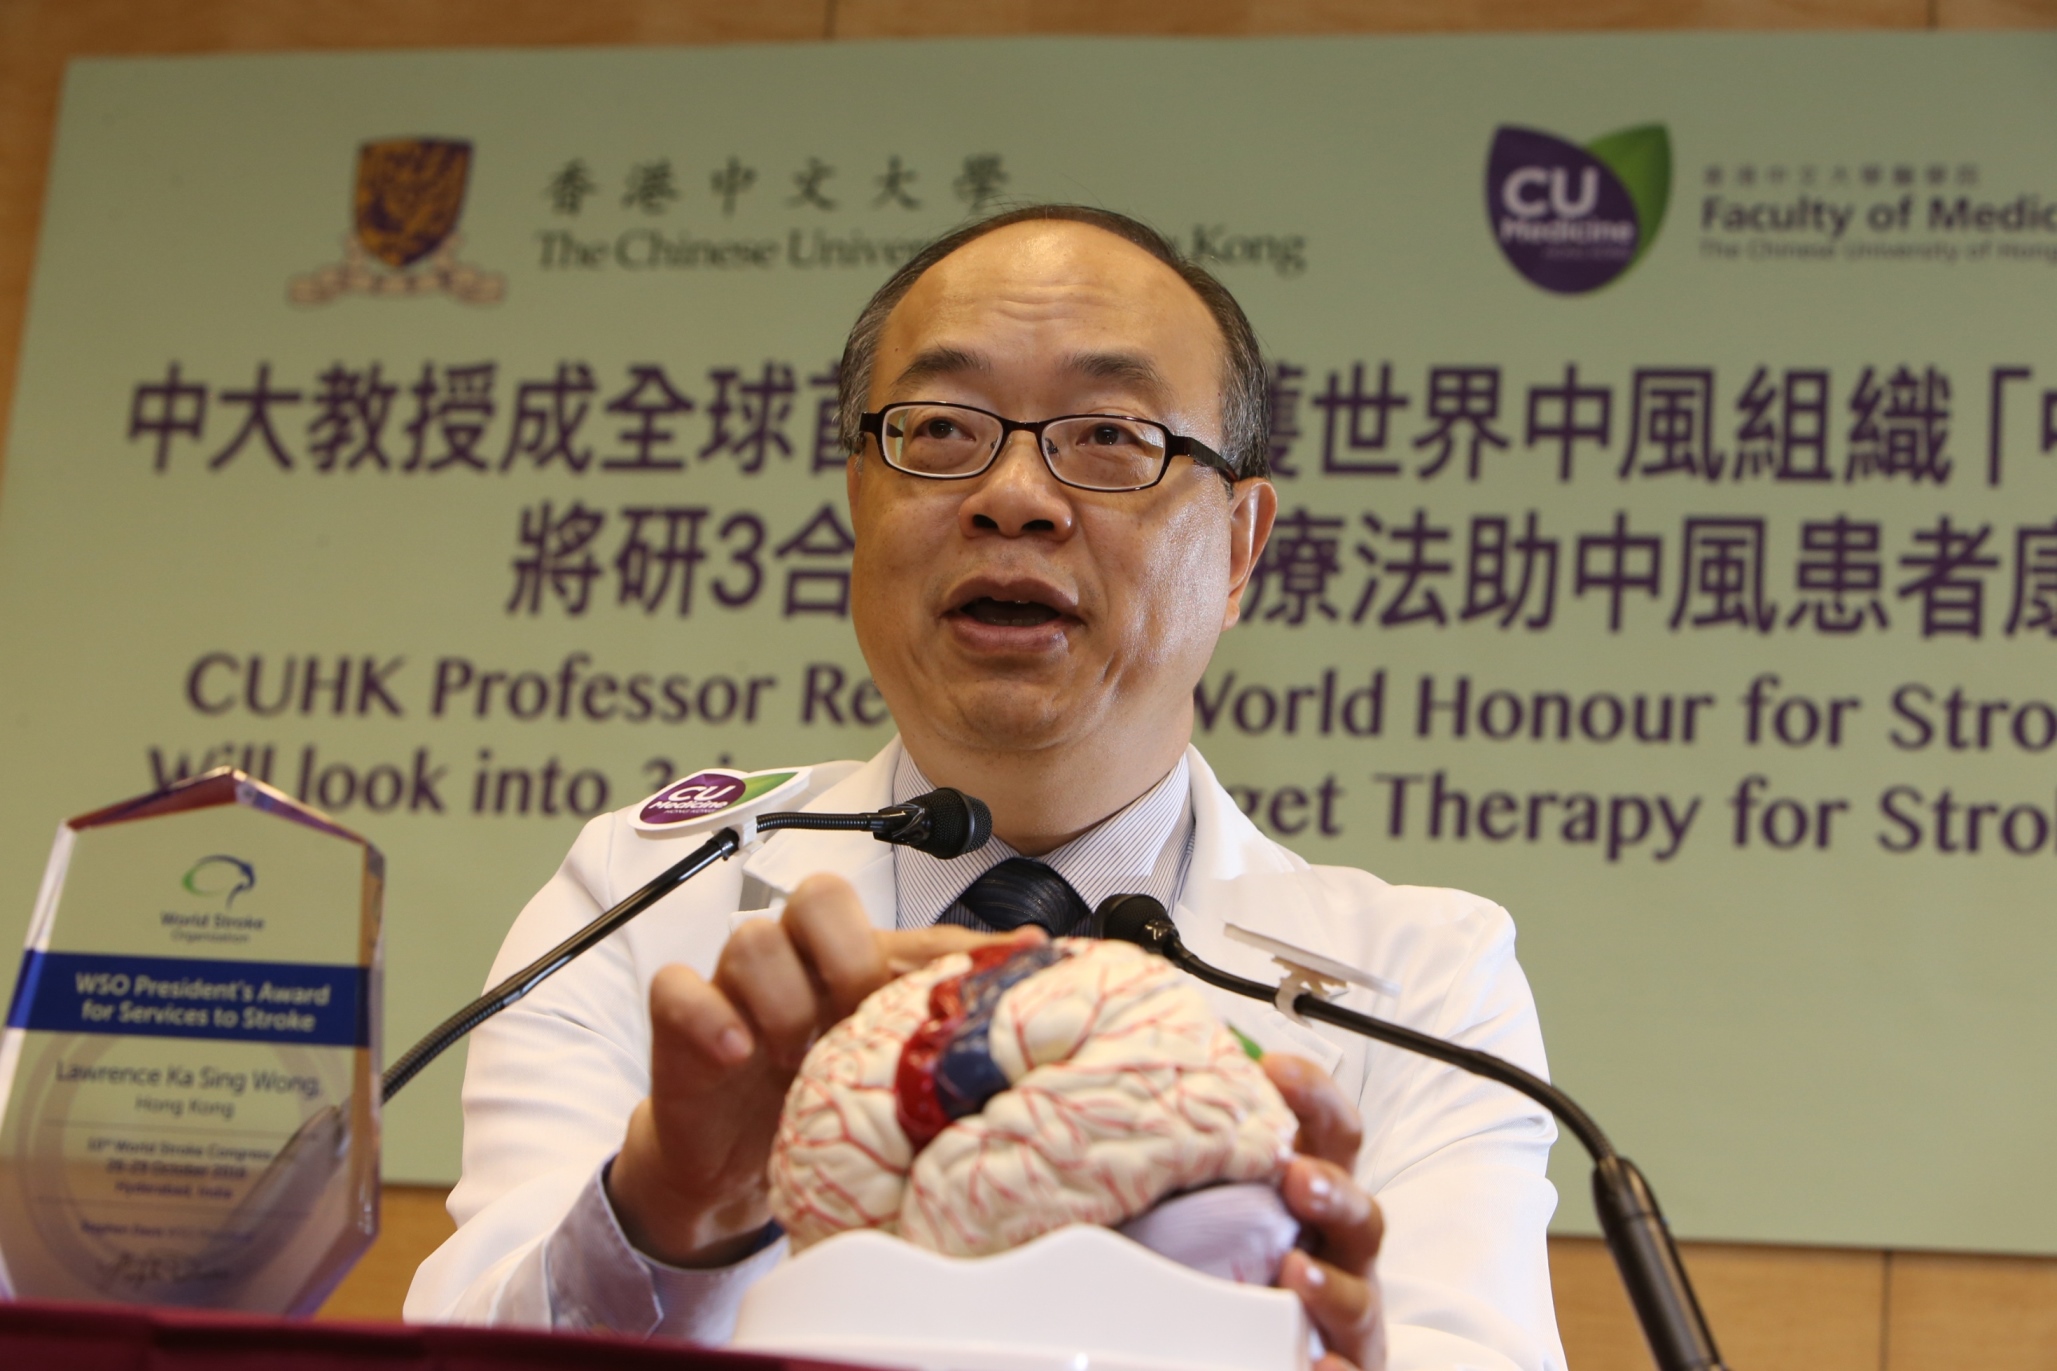 Prof. Lawrence Ka Sing WONG explains ‘PMS’ can help on the recovery of motor function of the disabled upper limb after stroke by blood flow augmentation to the brain and stimulation of surviving brain cells.